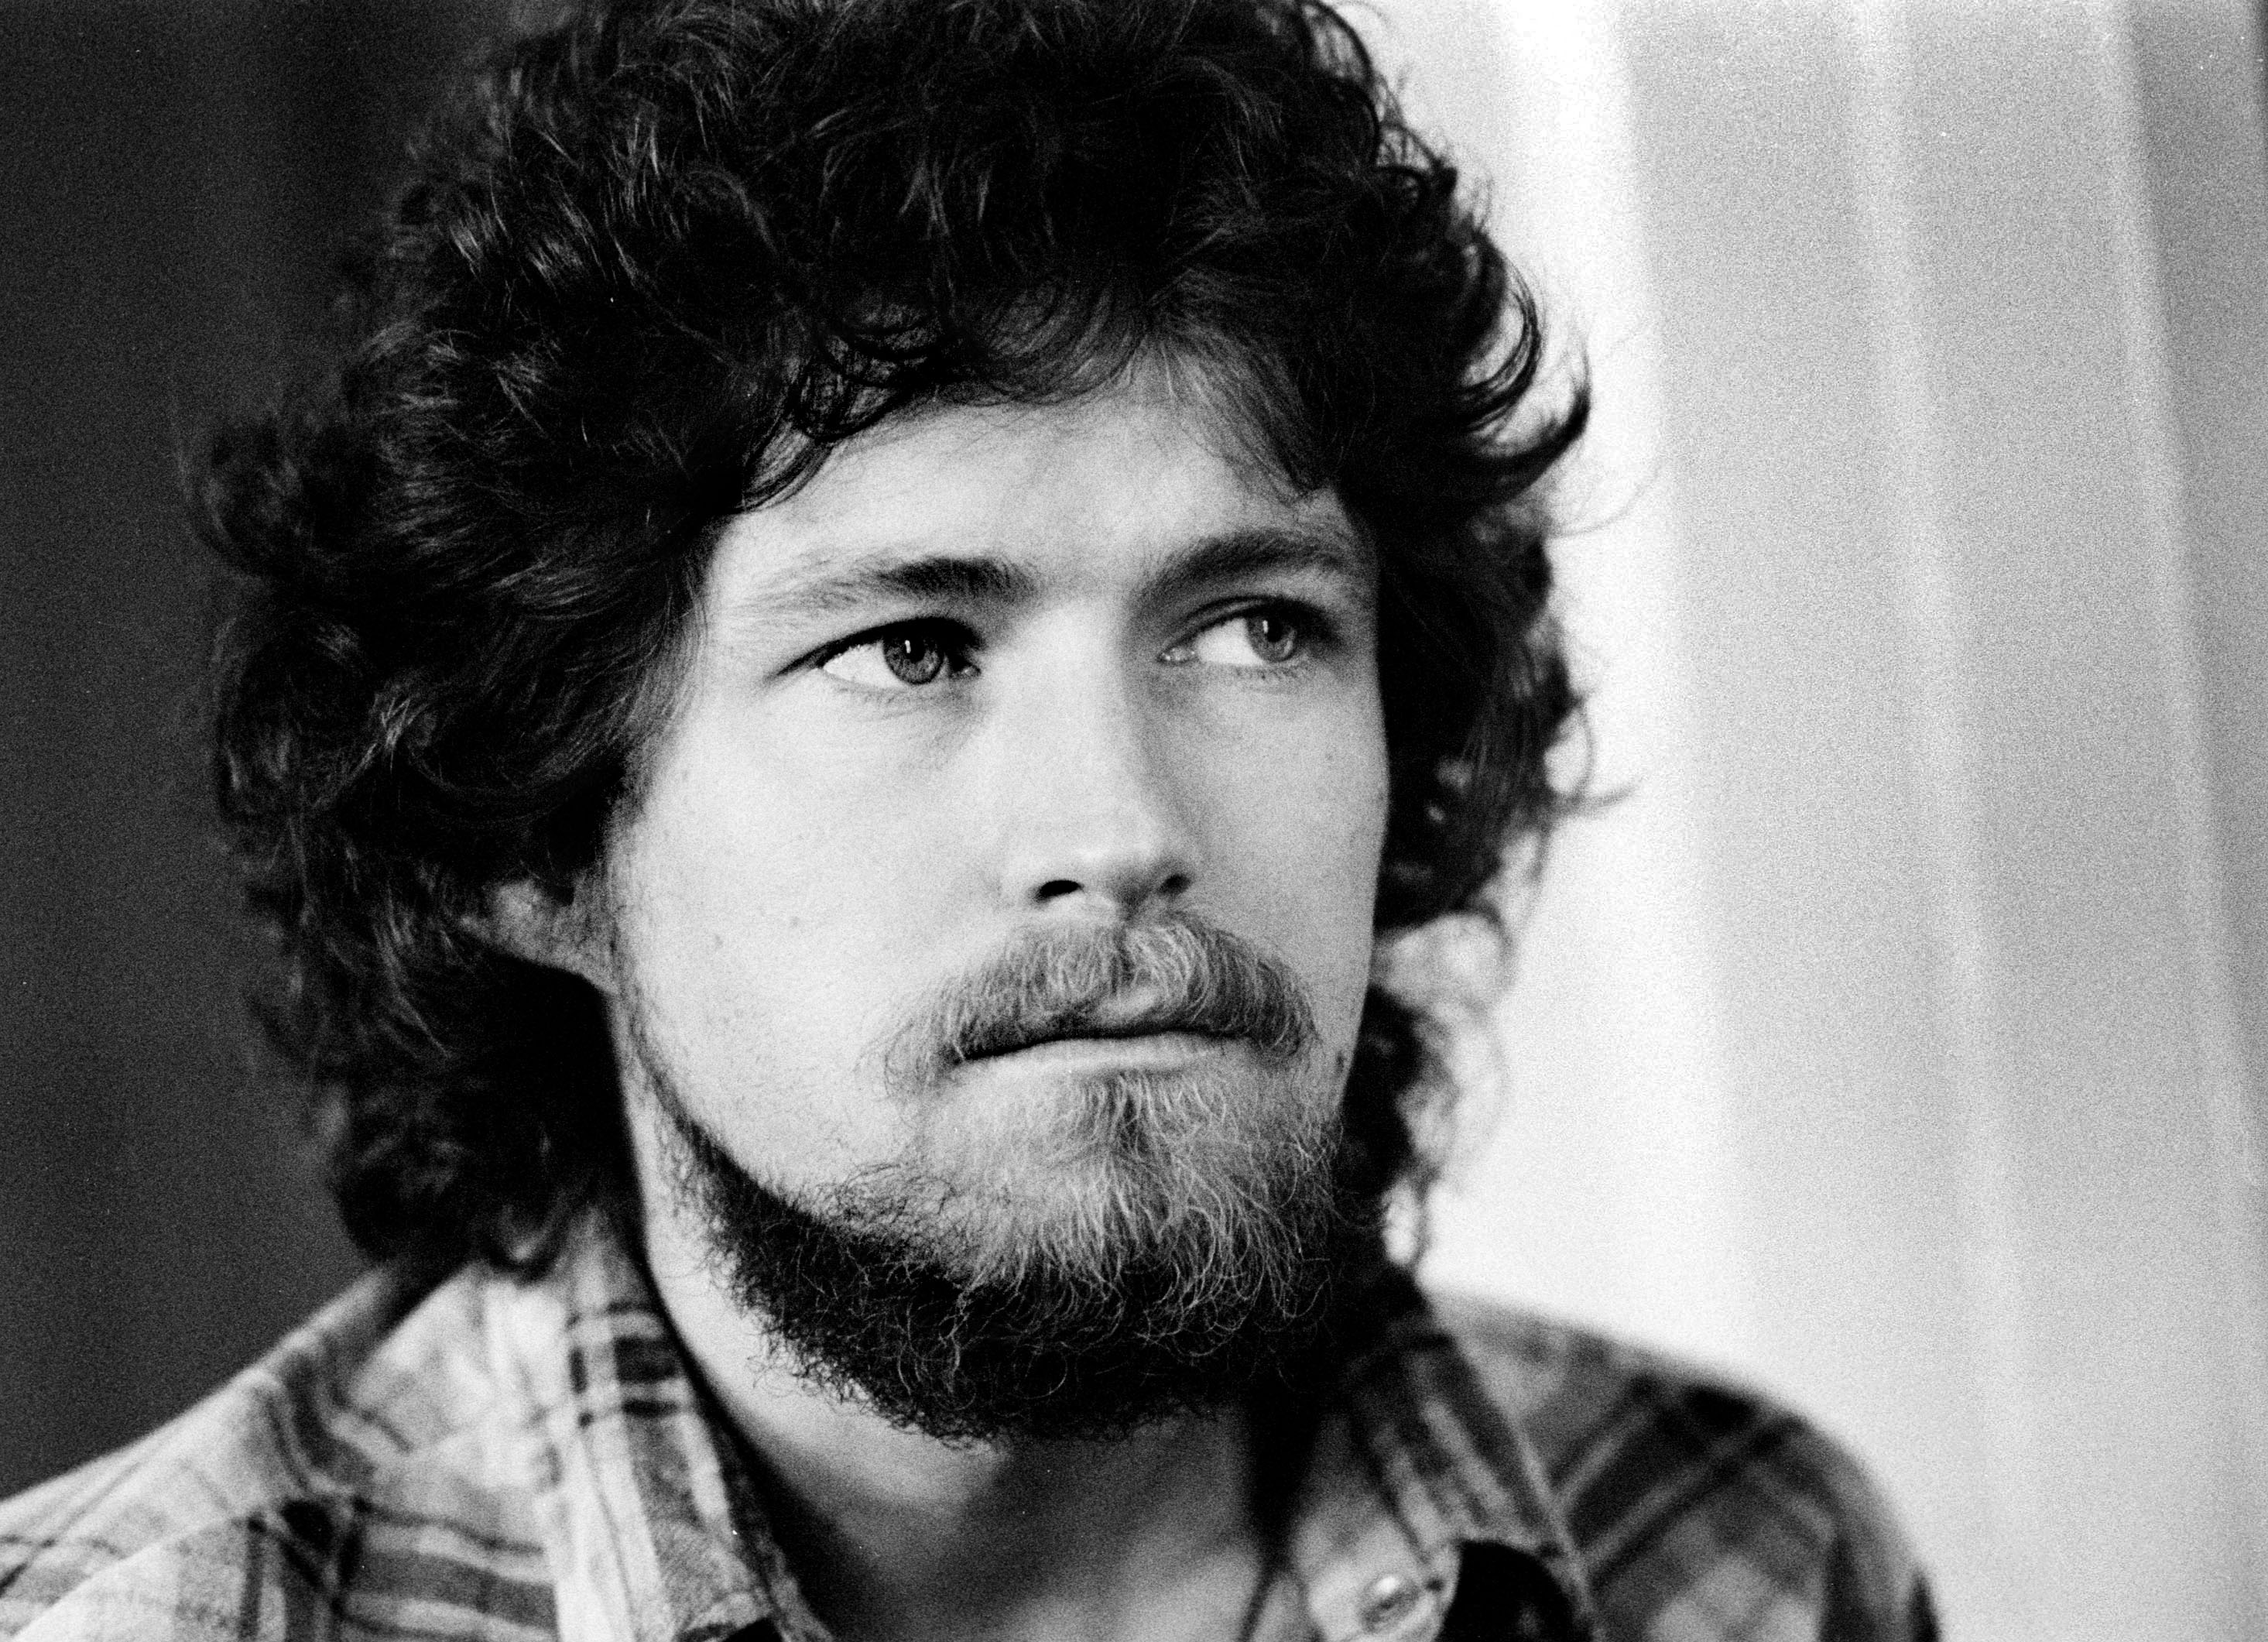 "The Boys of Summer" singer Don Henley in black-and-white